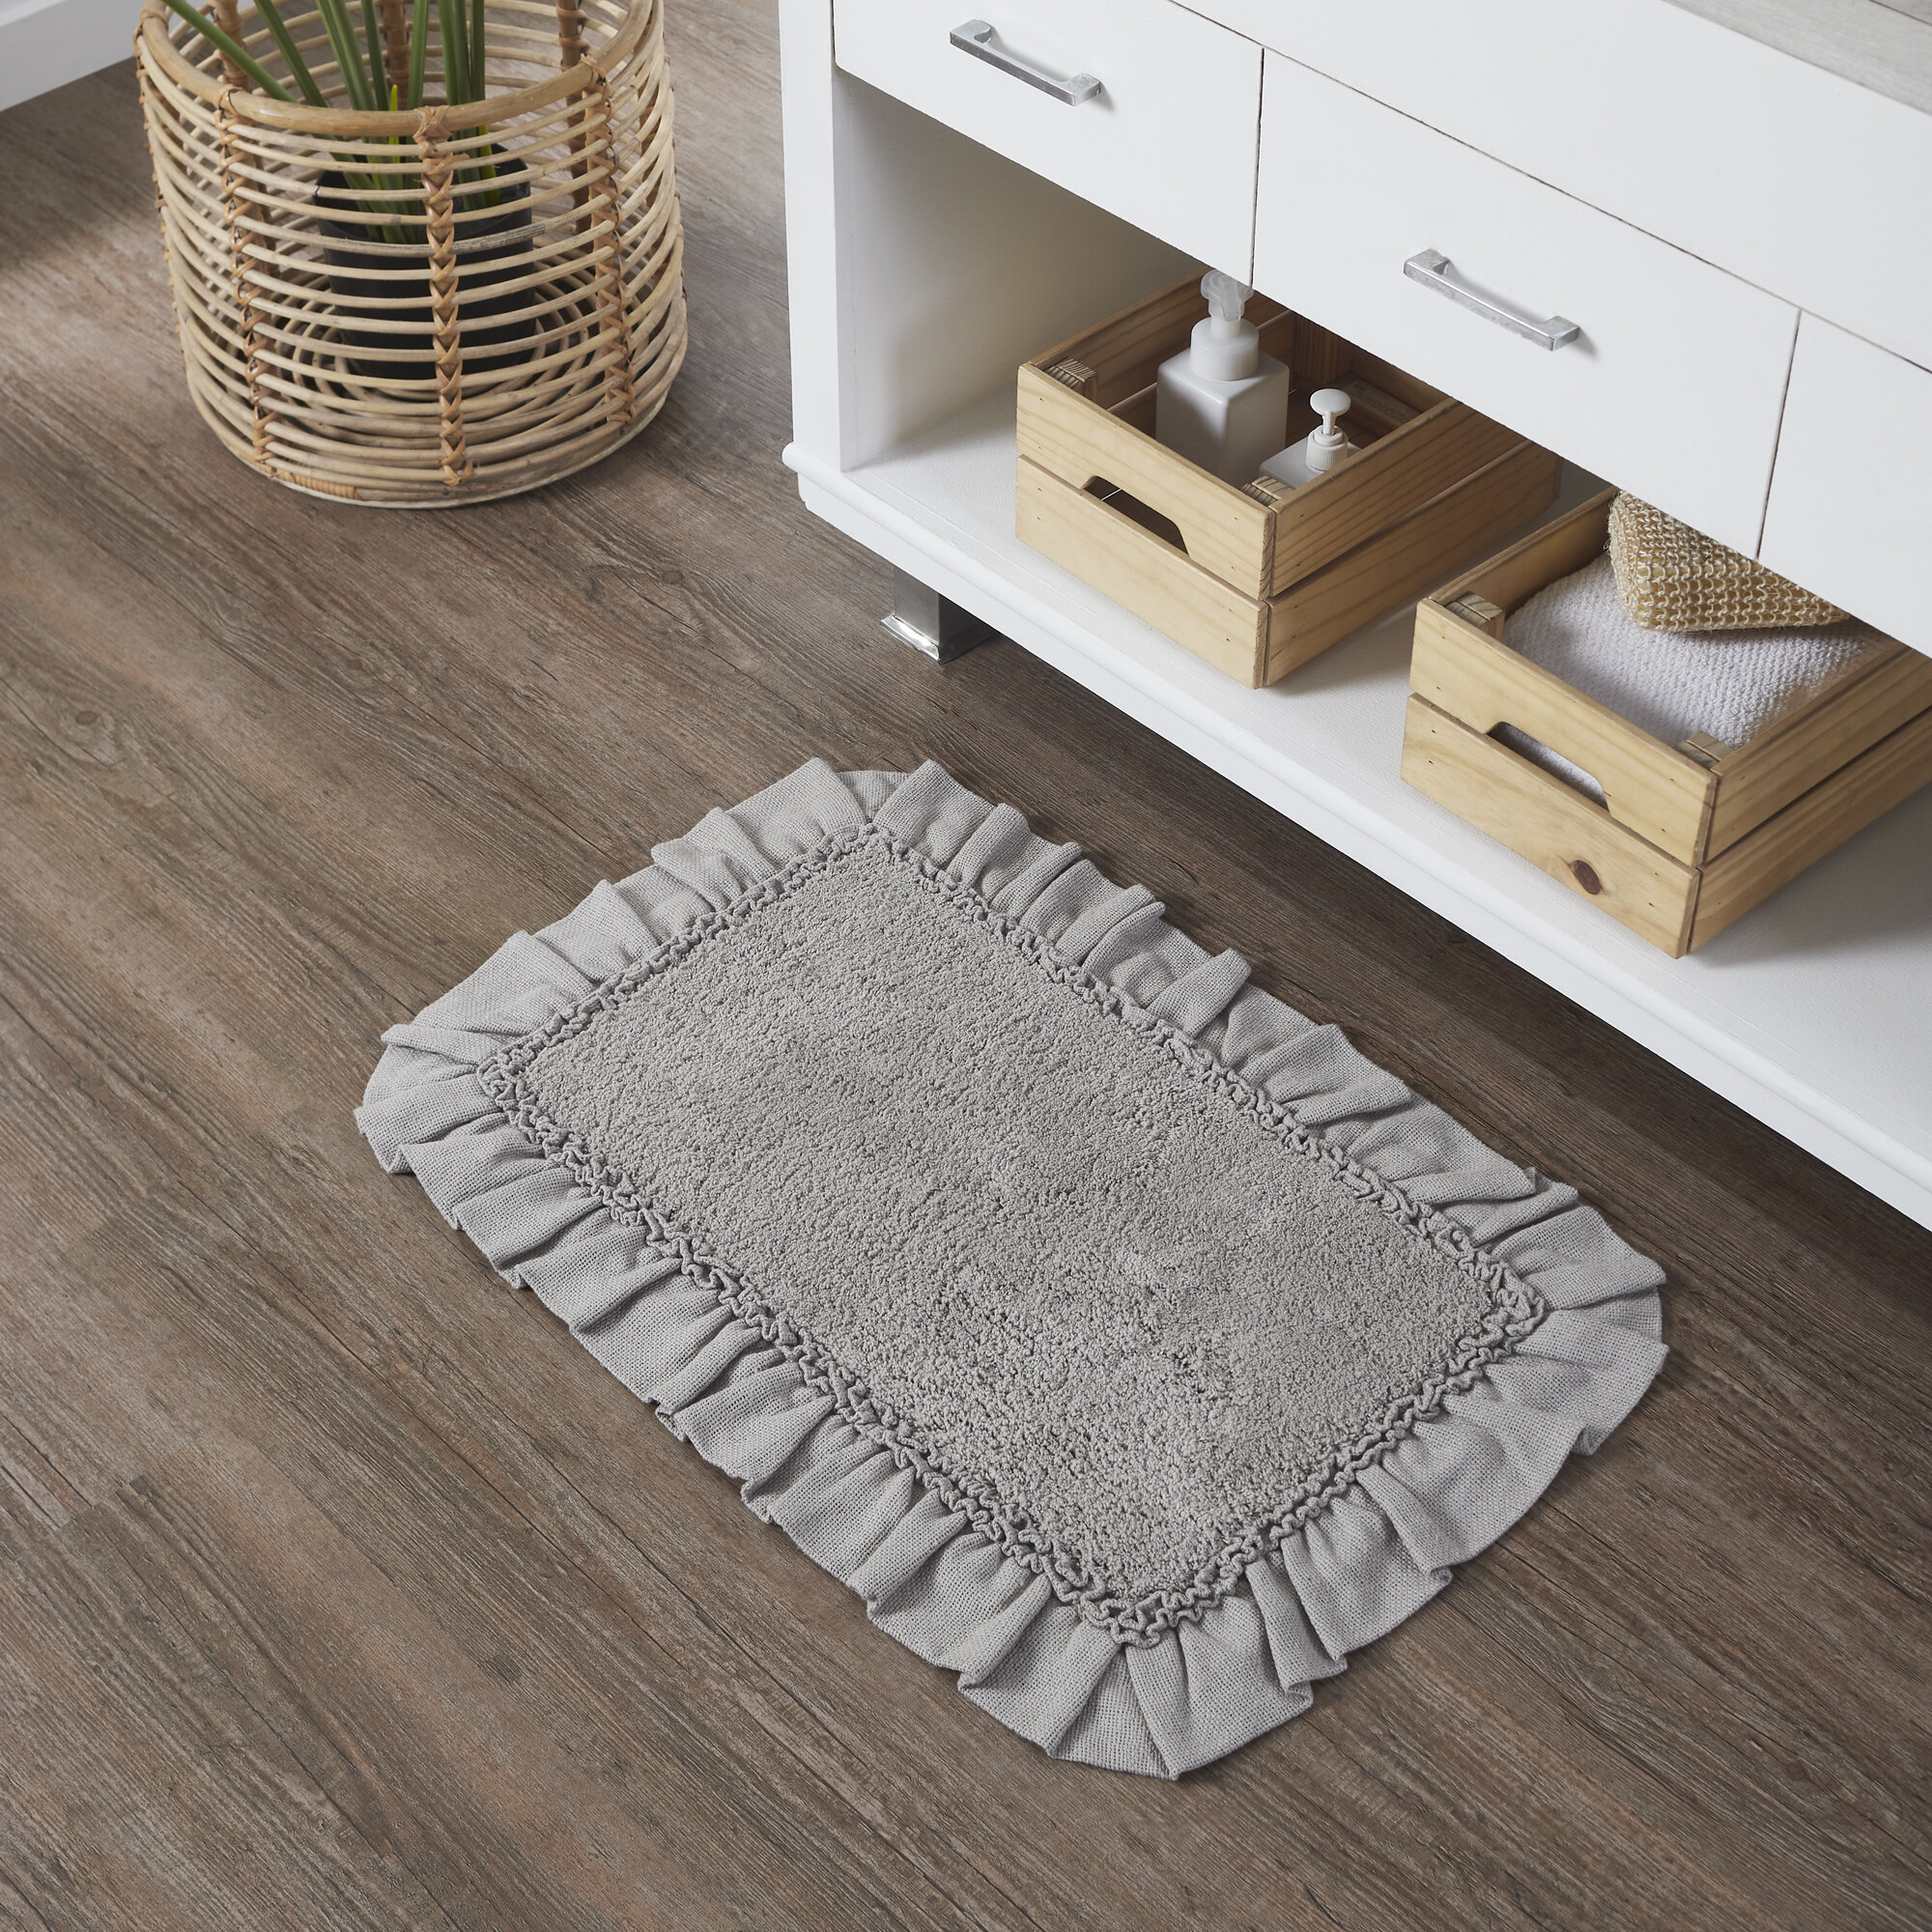 Mersin Gradient Chenille Water Absorbent Soft Plush Bath Rug Sand & Stable Size: 16 W x 24 L, Color: Gray